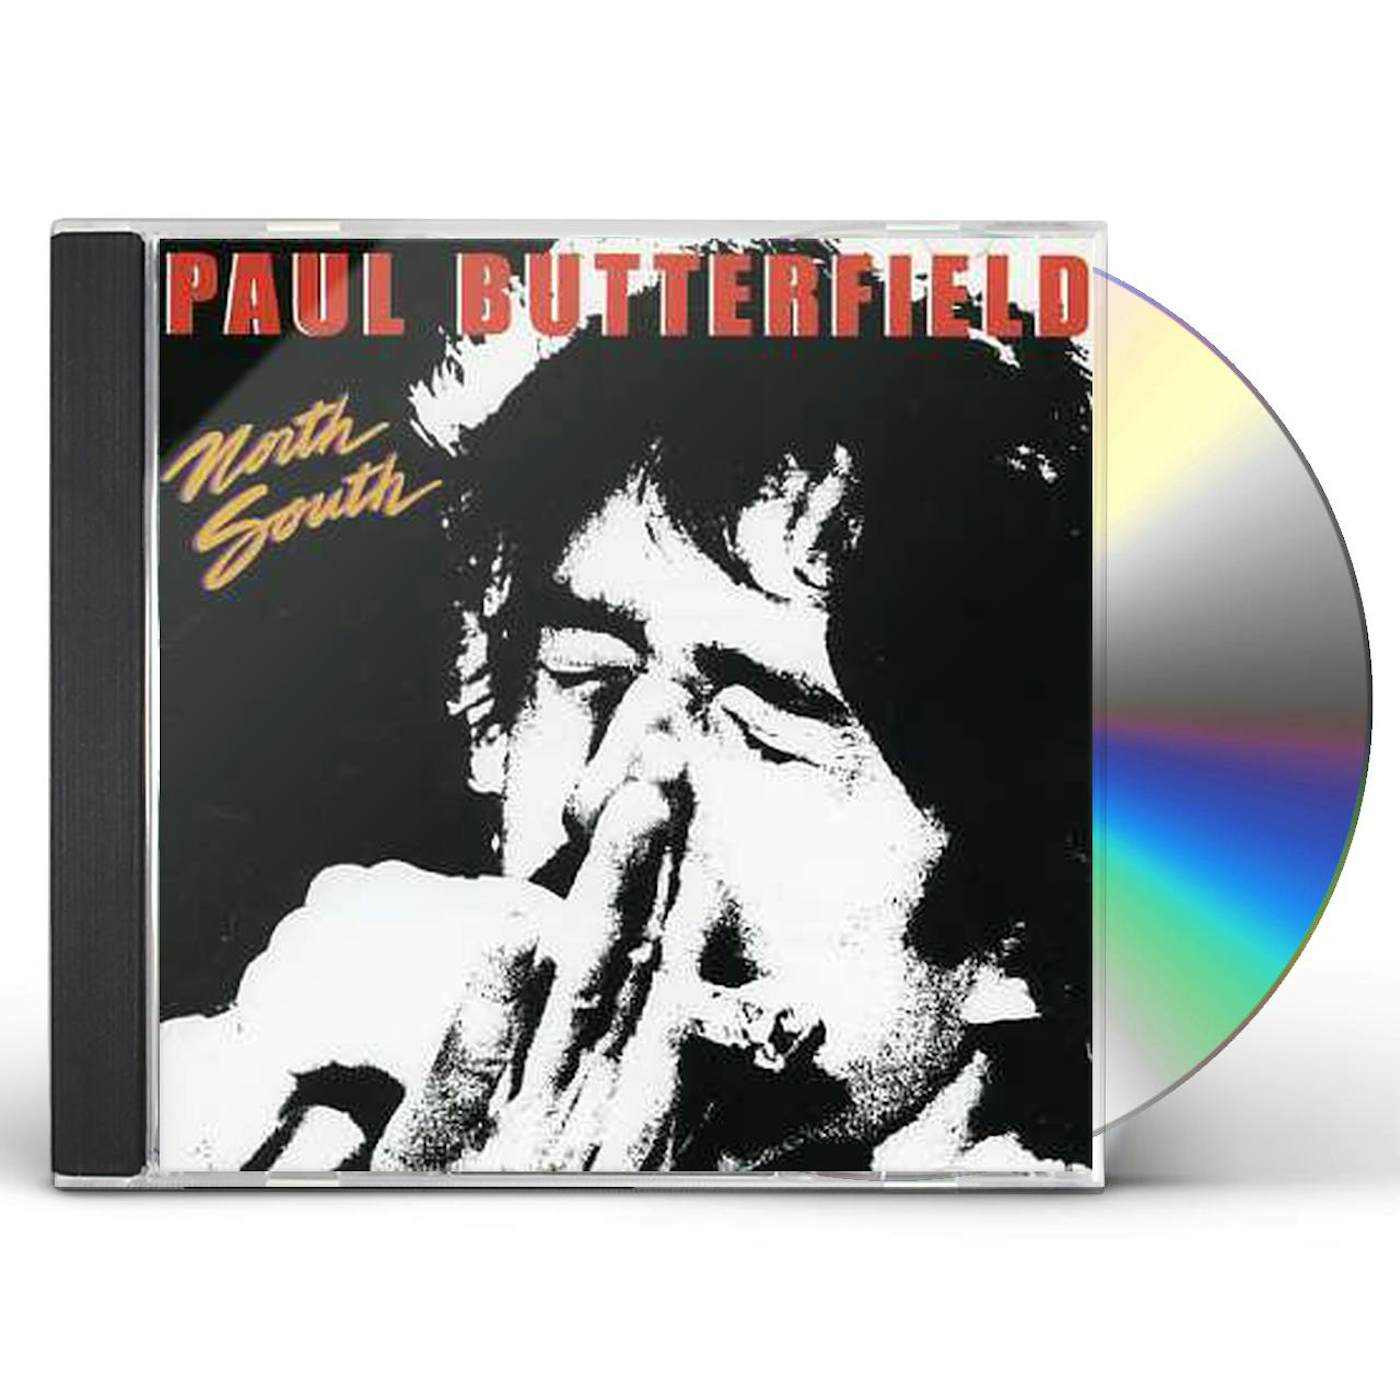 Paul Butterfield NORTH SOUTH CD